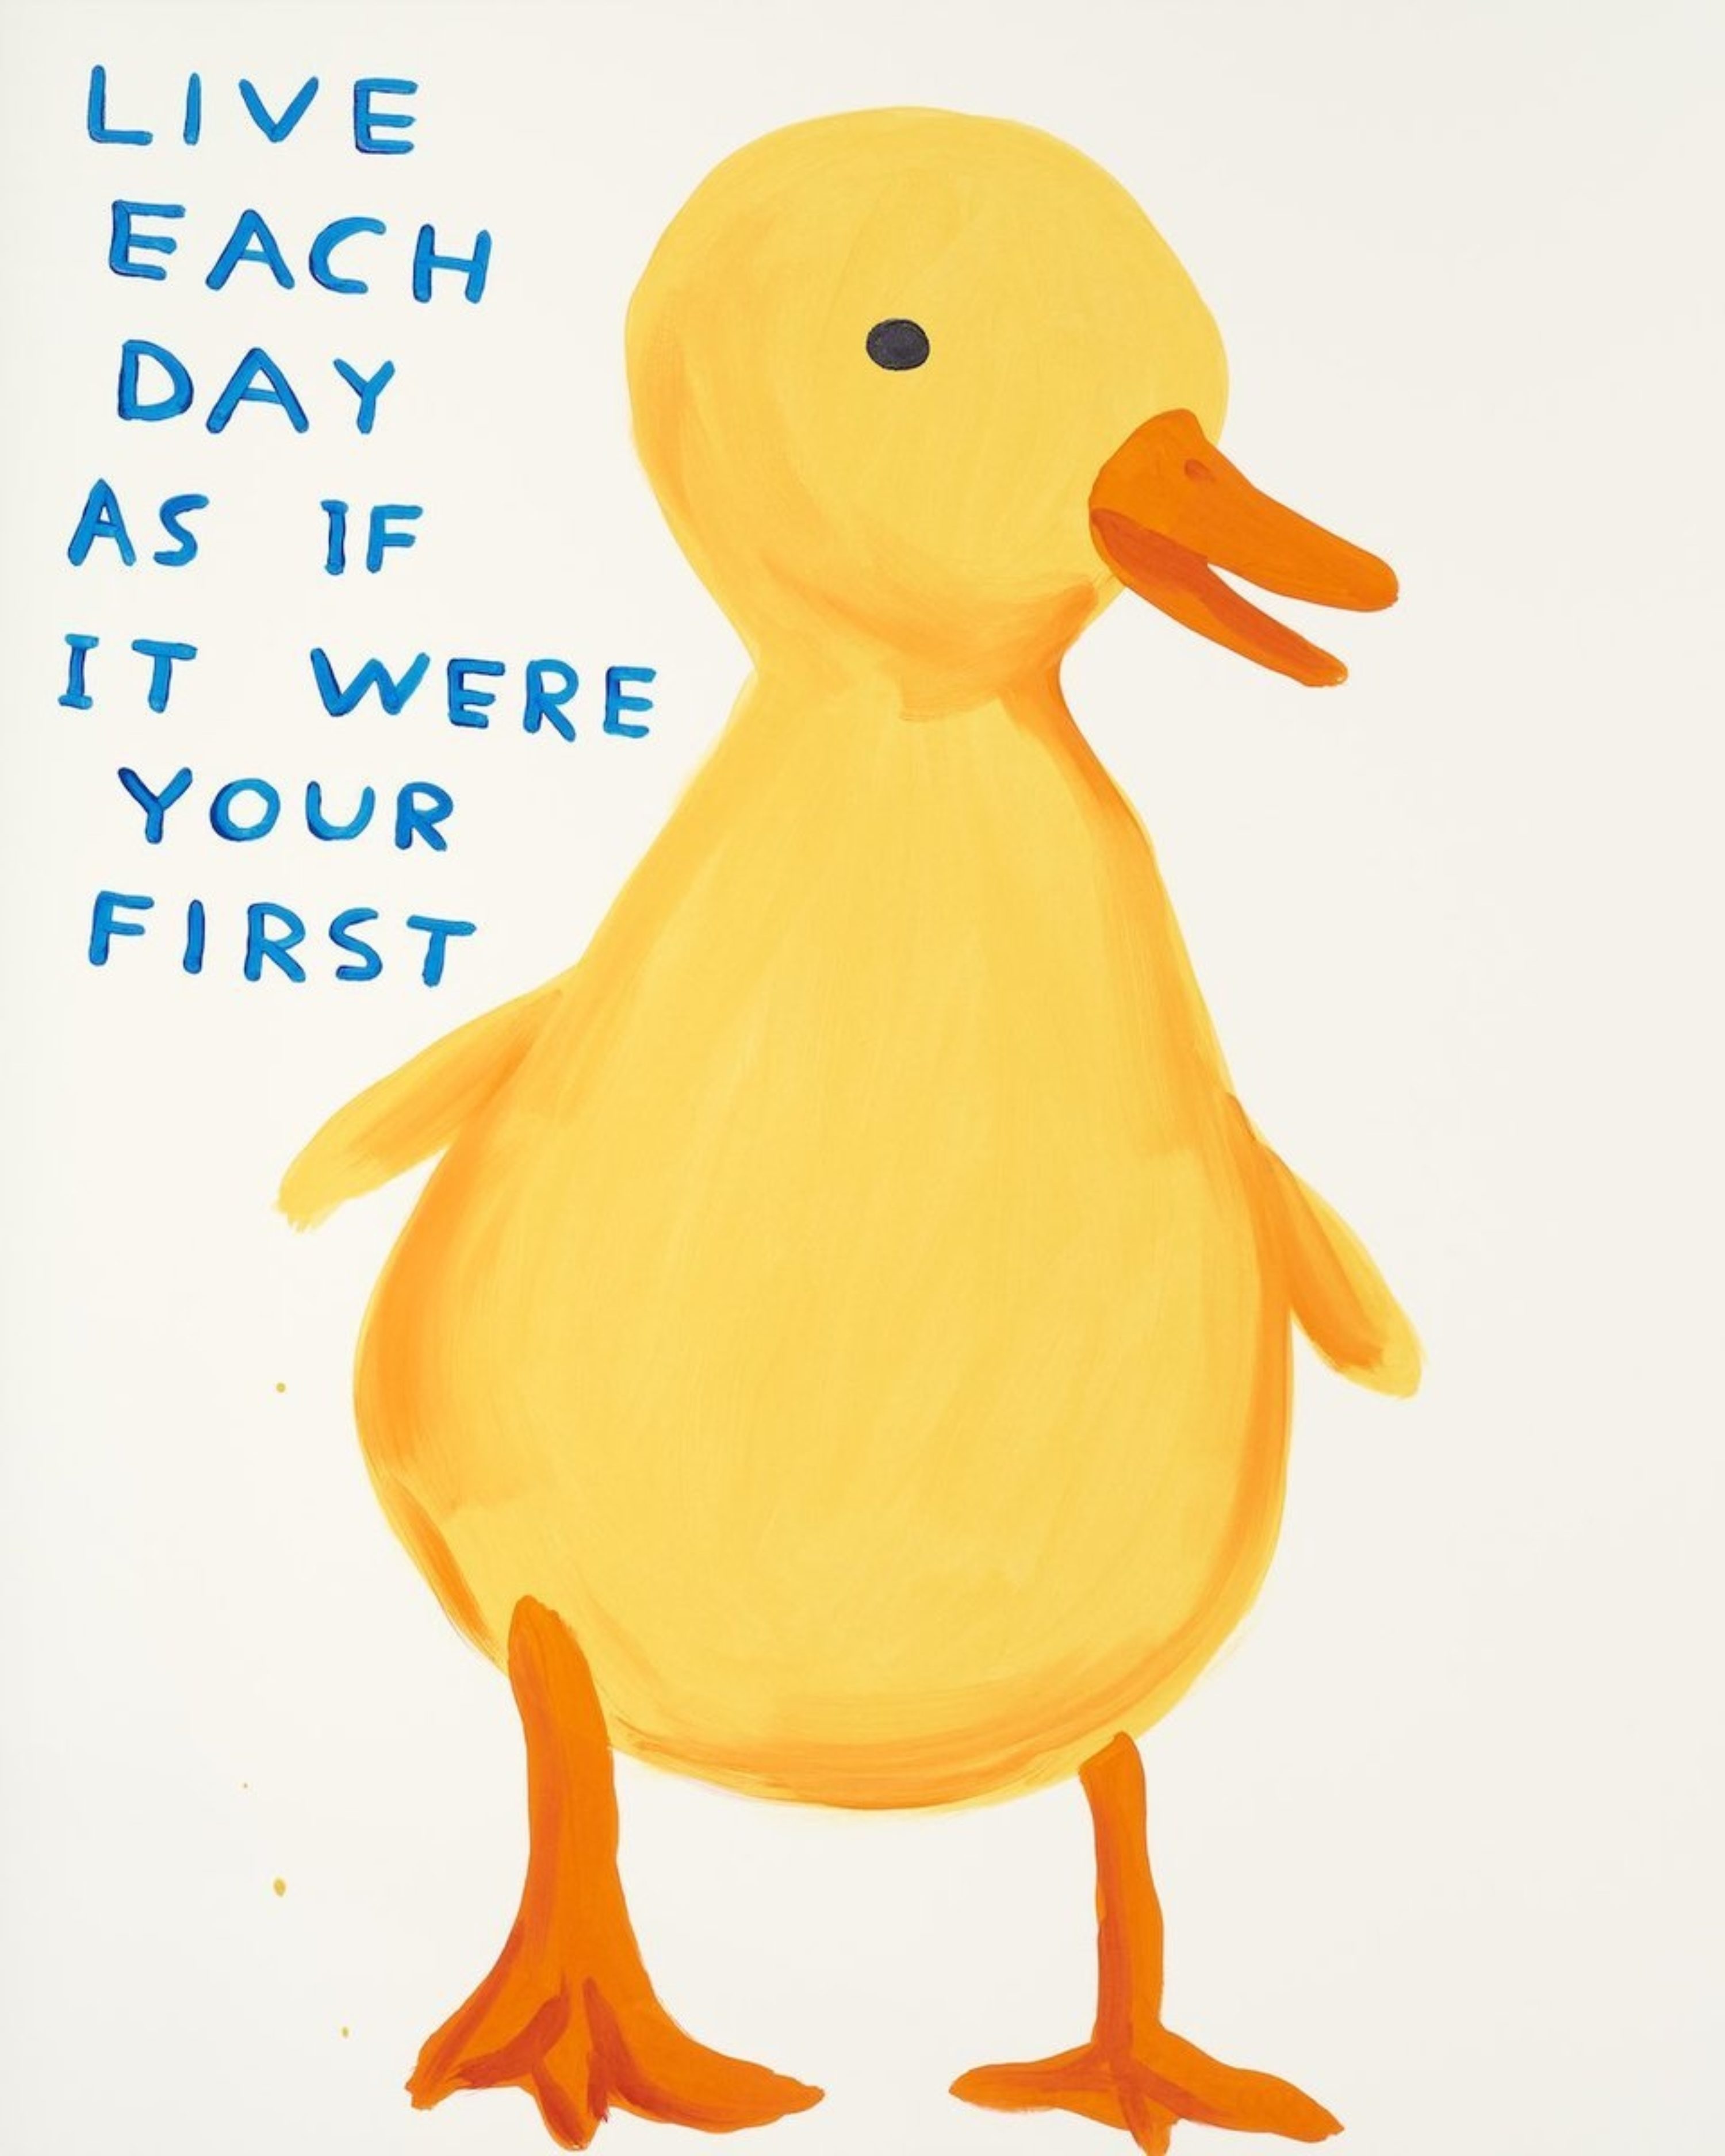 DAVID SHRIGLEY-LIVE EACH DAY AS IF IT WERE YOUR FIRST